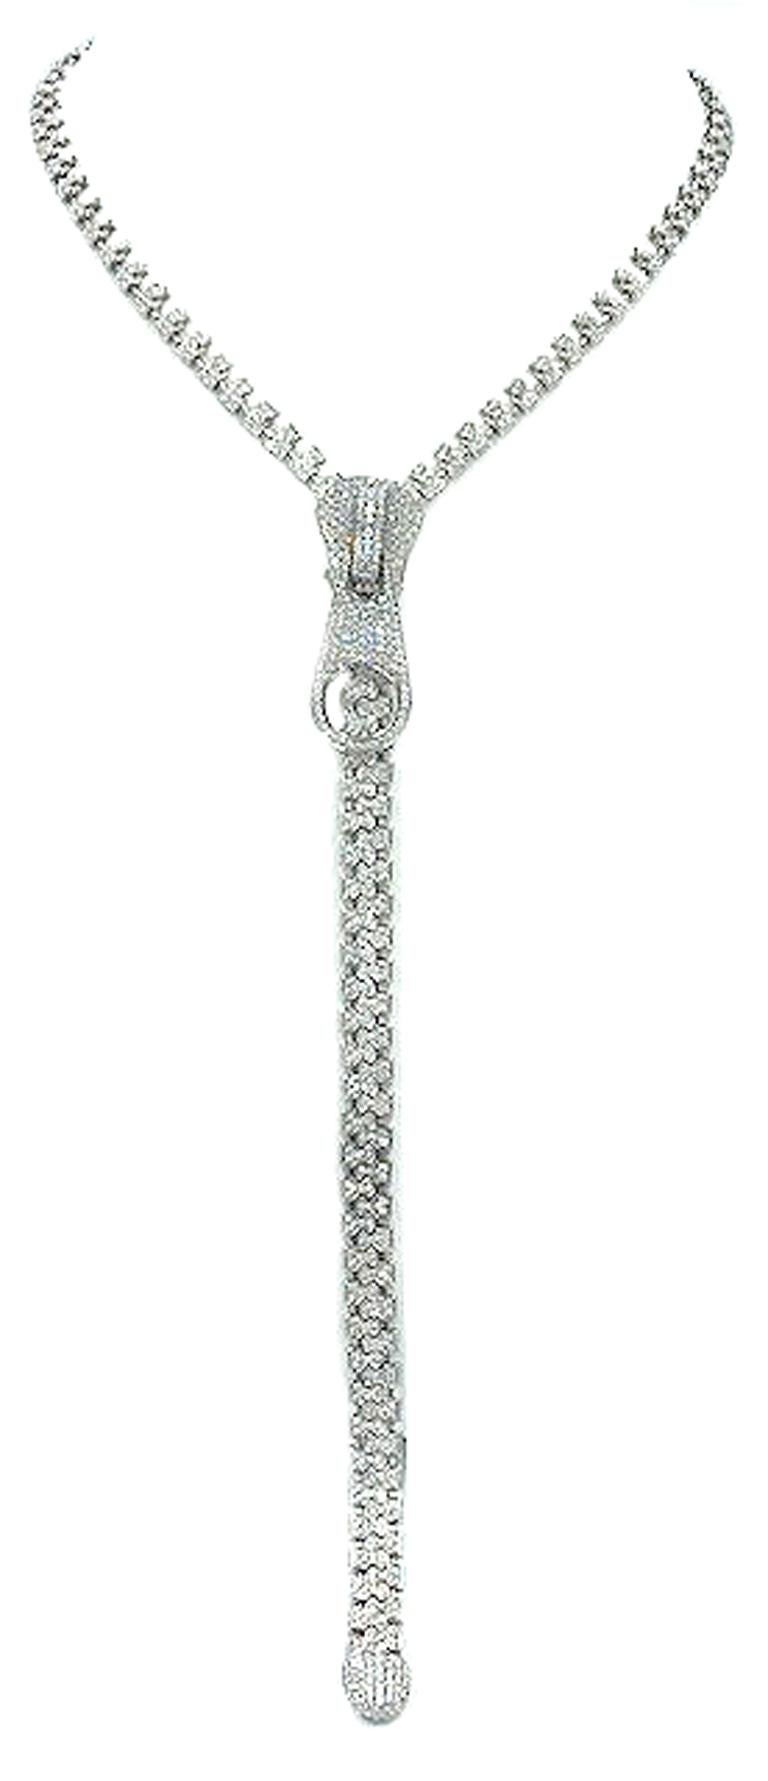 Inspired by the famous zipper necklaces created by famous jewelry houses. This 18k white gold and diamond zipper necklace measures 27 inches in length and sparkles with 7.20cts of white diamonds. The beauty of this necklace is that the zipper is